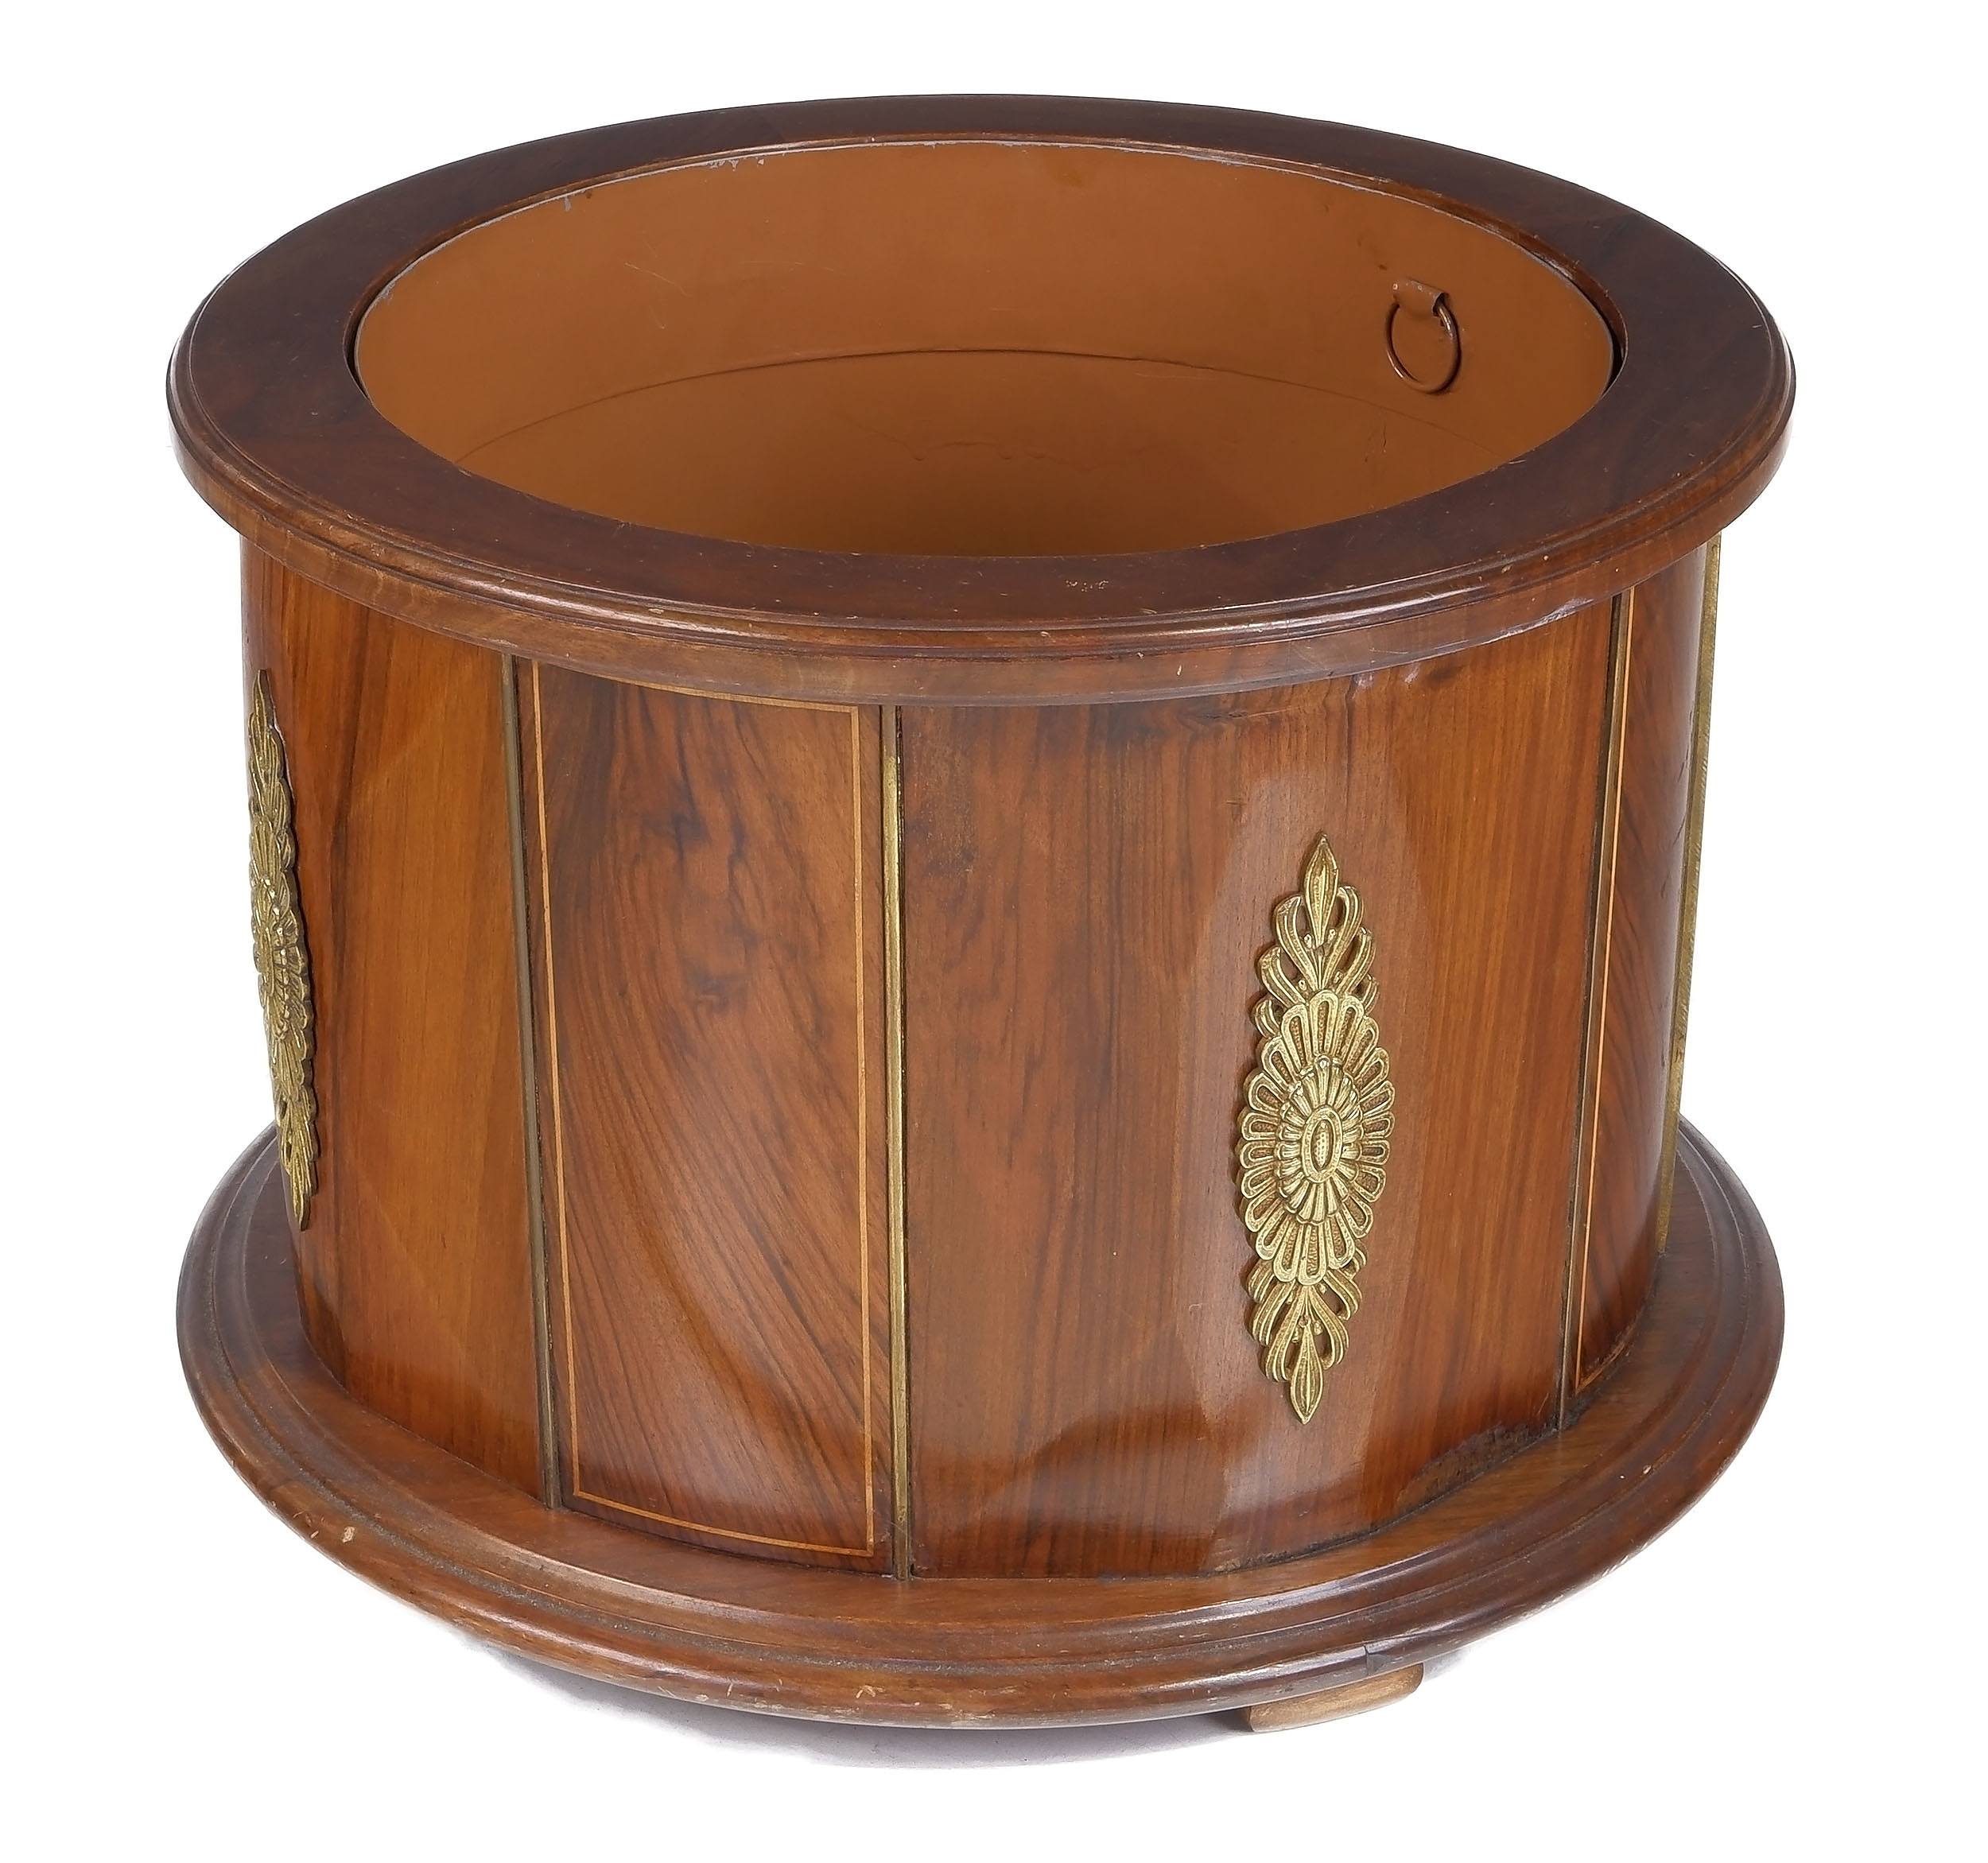 'Walnut Planter or Wine Cooler with Brass Appliques'